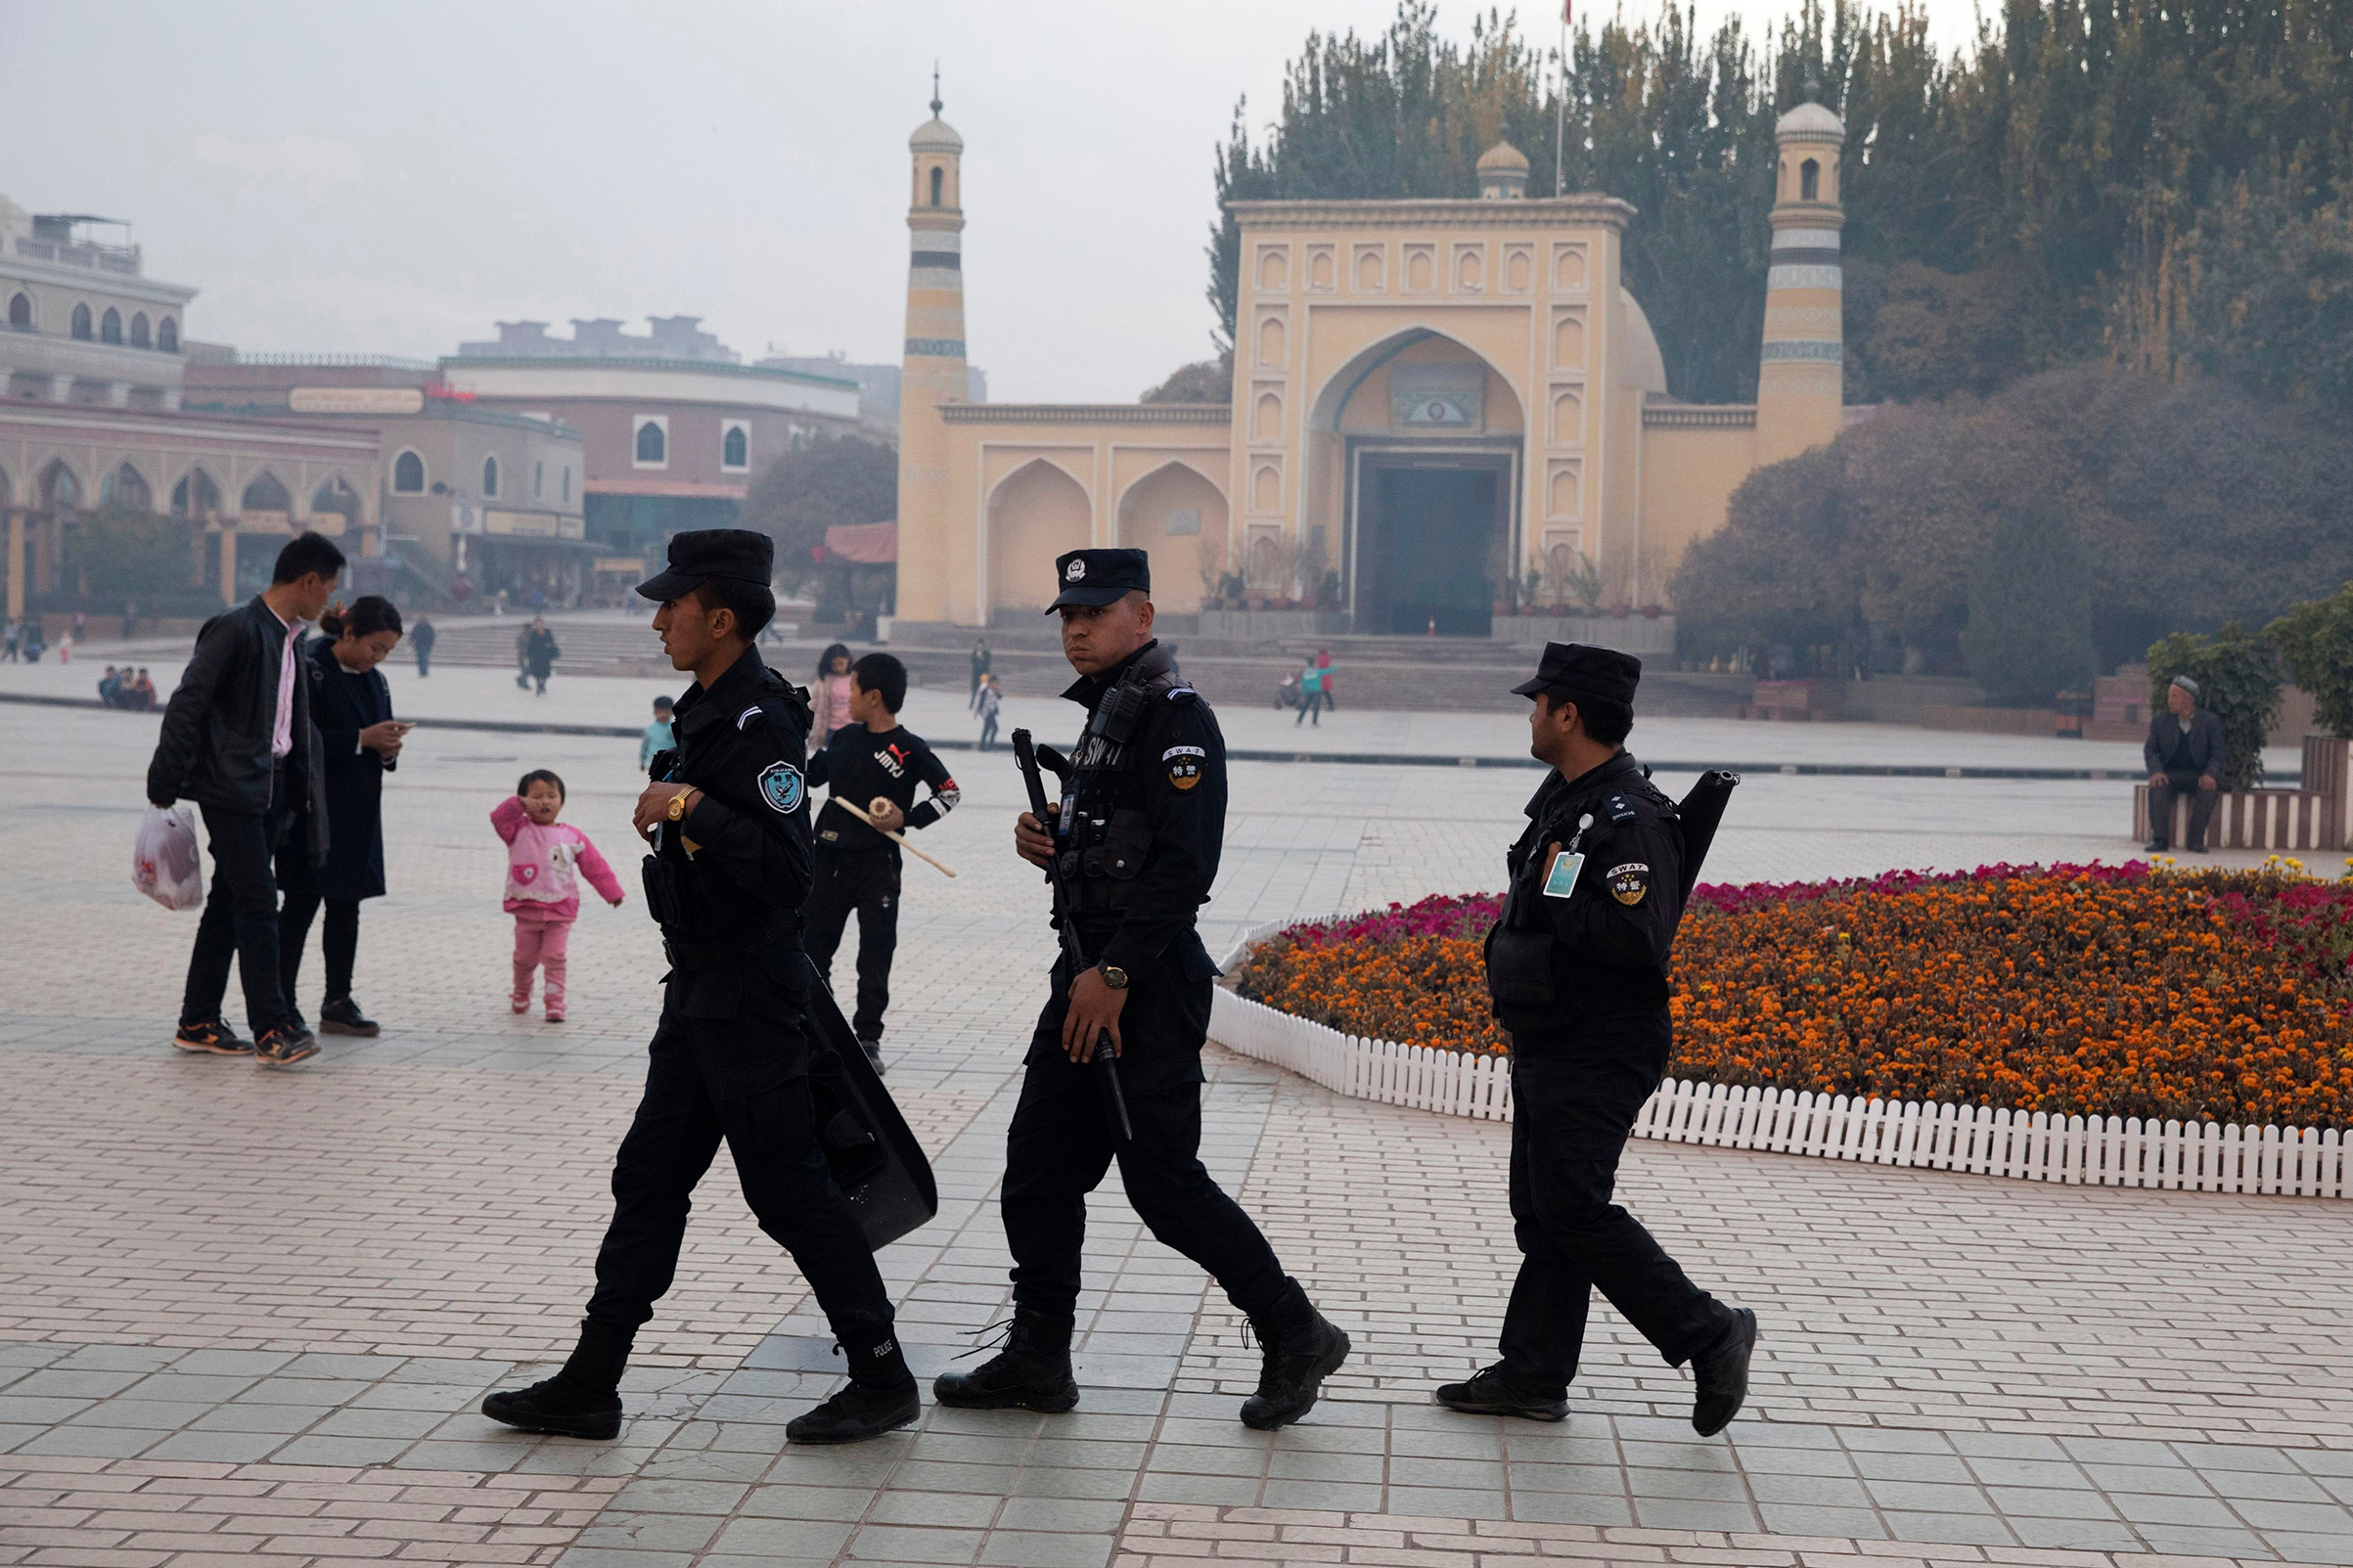 Security personnel patrol near the Id Kah Mosque in western China’s Xinjiang region on Nov. 4 (Ng Han Guan—AP/Shutterstock)